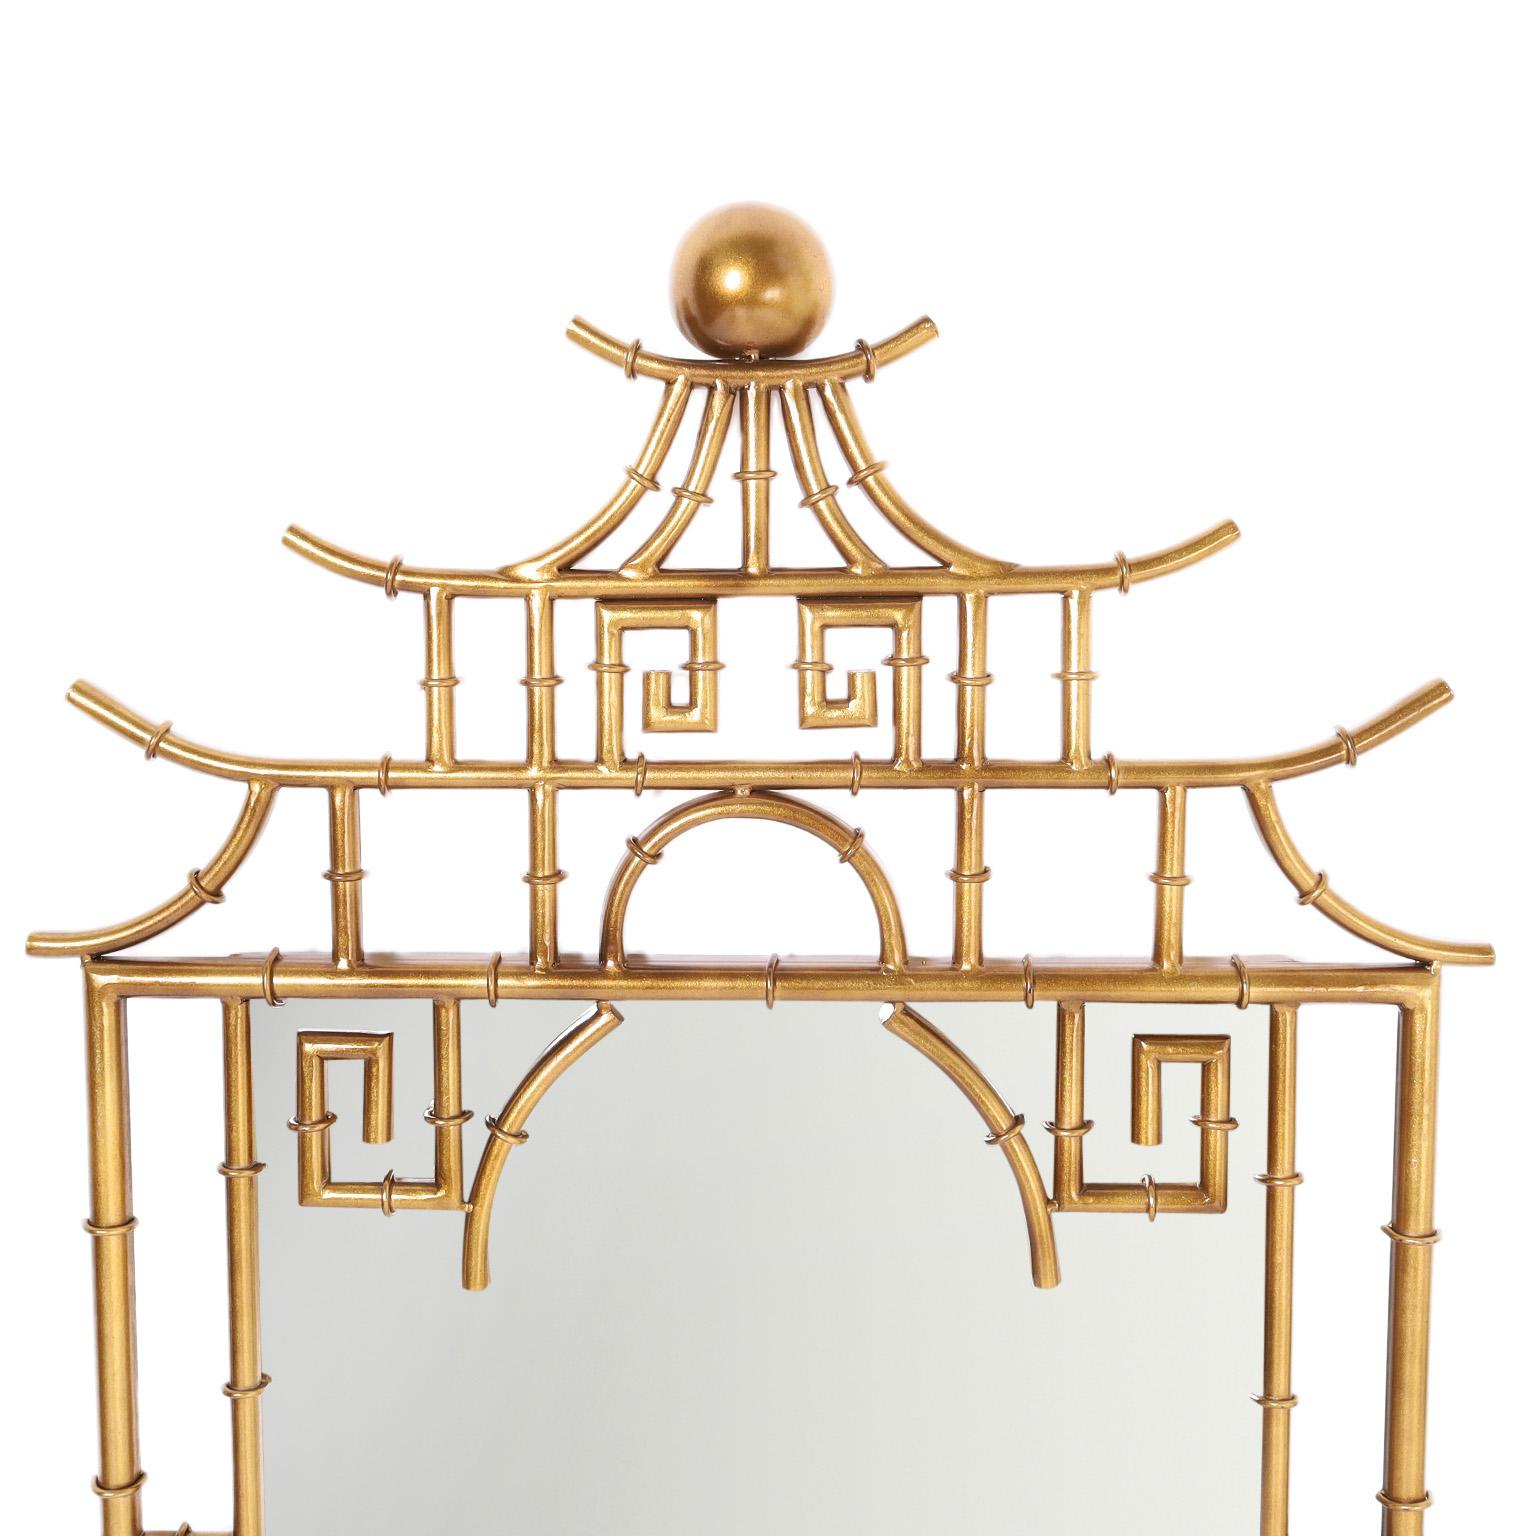 Wall mirror crafted in metal with a gilt finish in an Asian modern form with a pagoda style top and Chinese Chippendale lines.